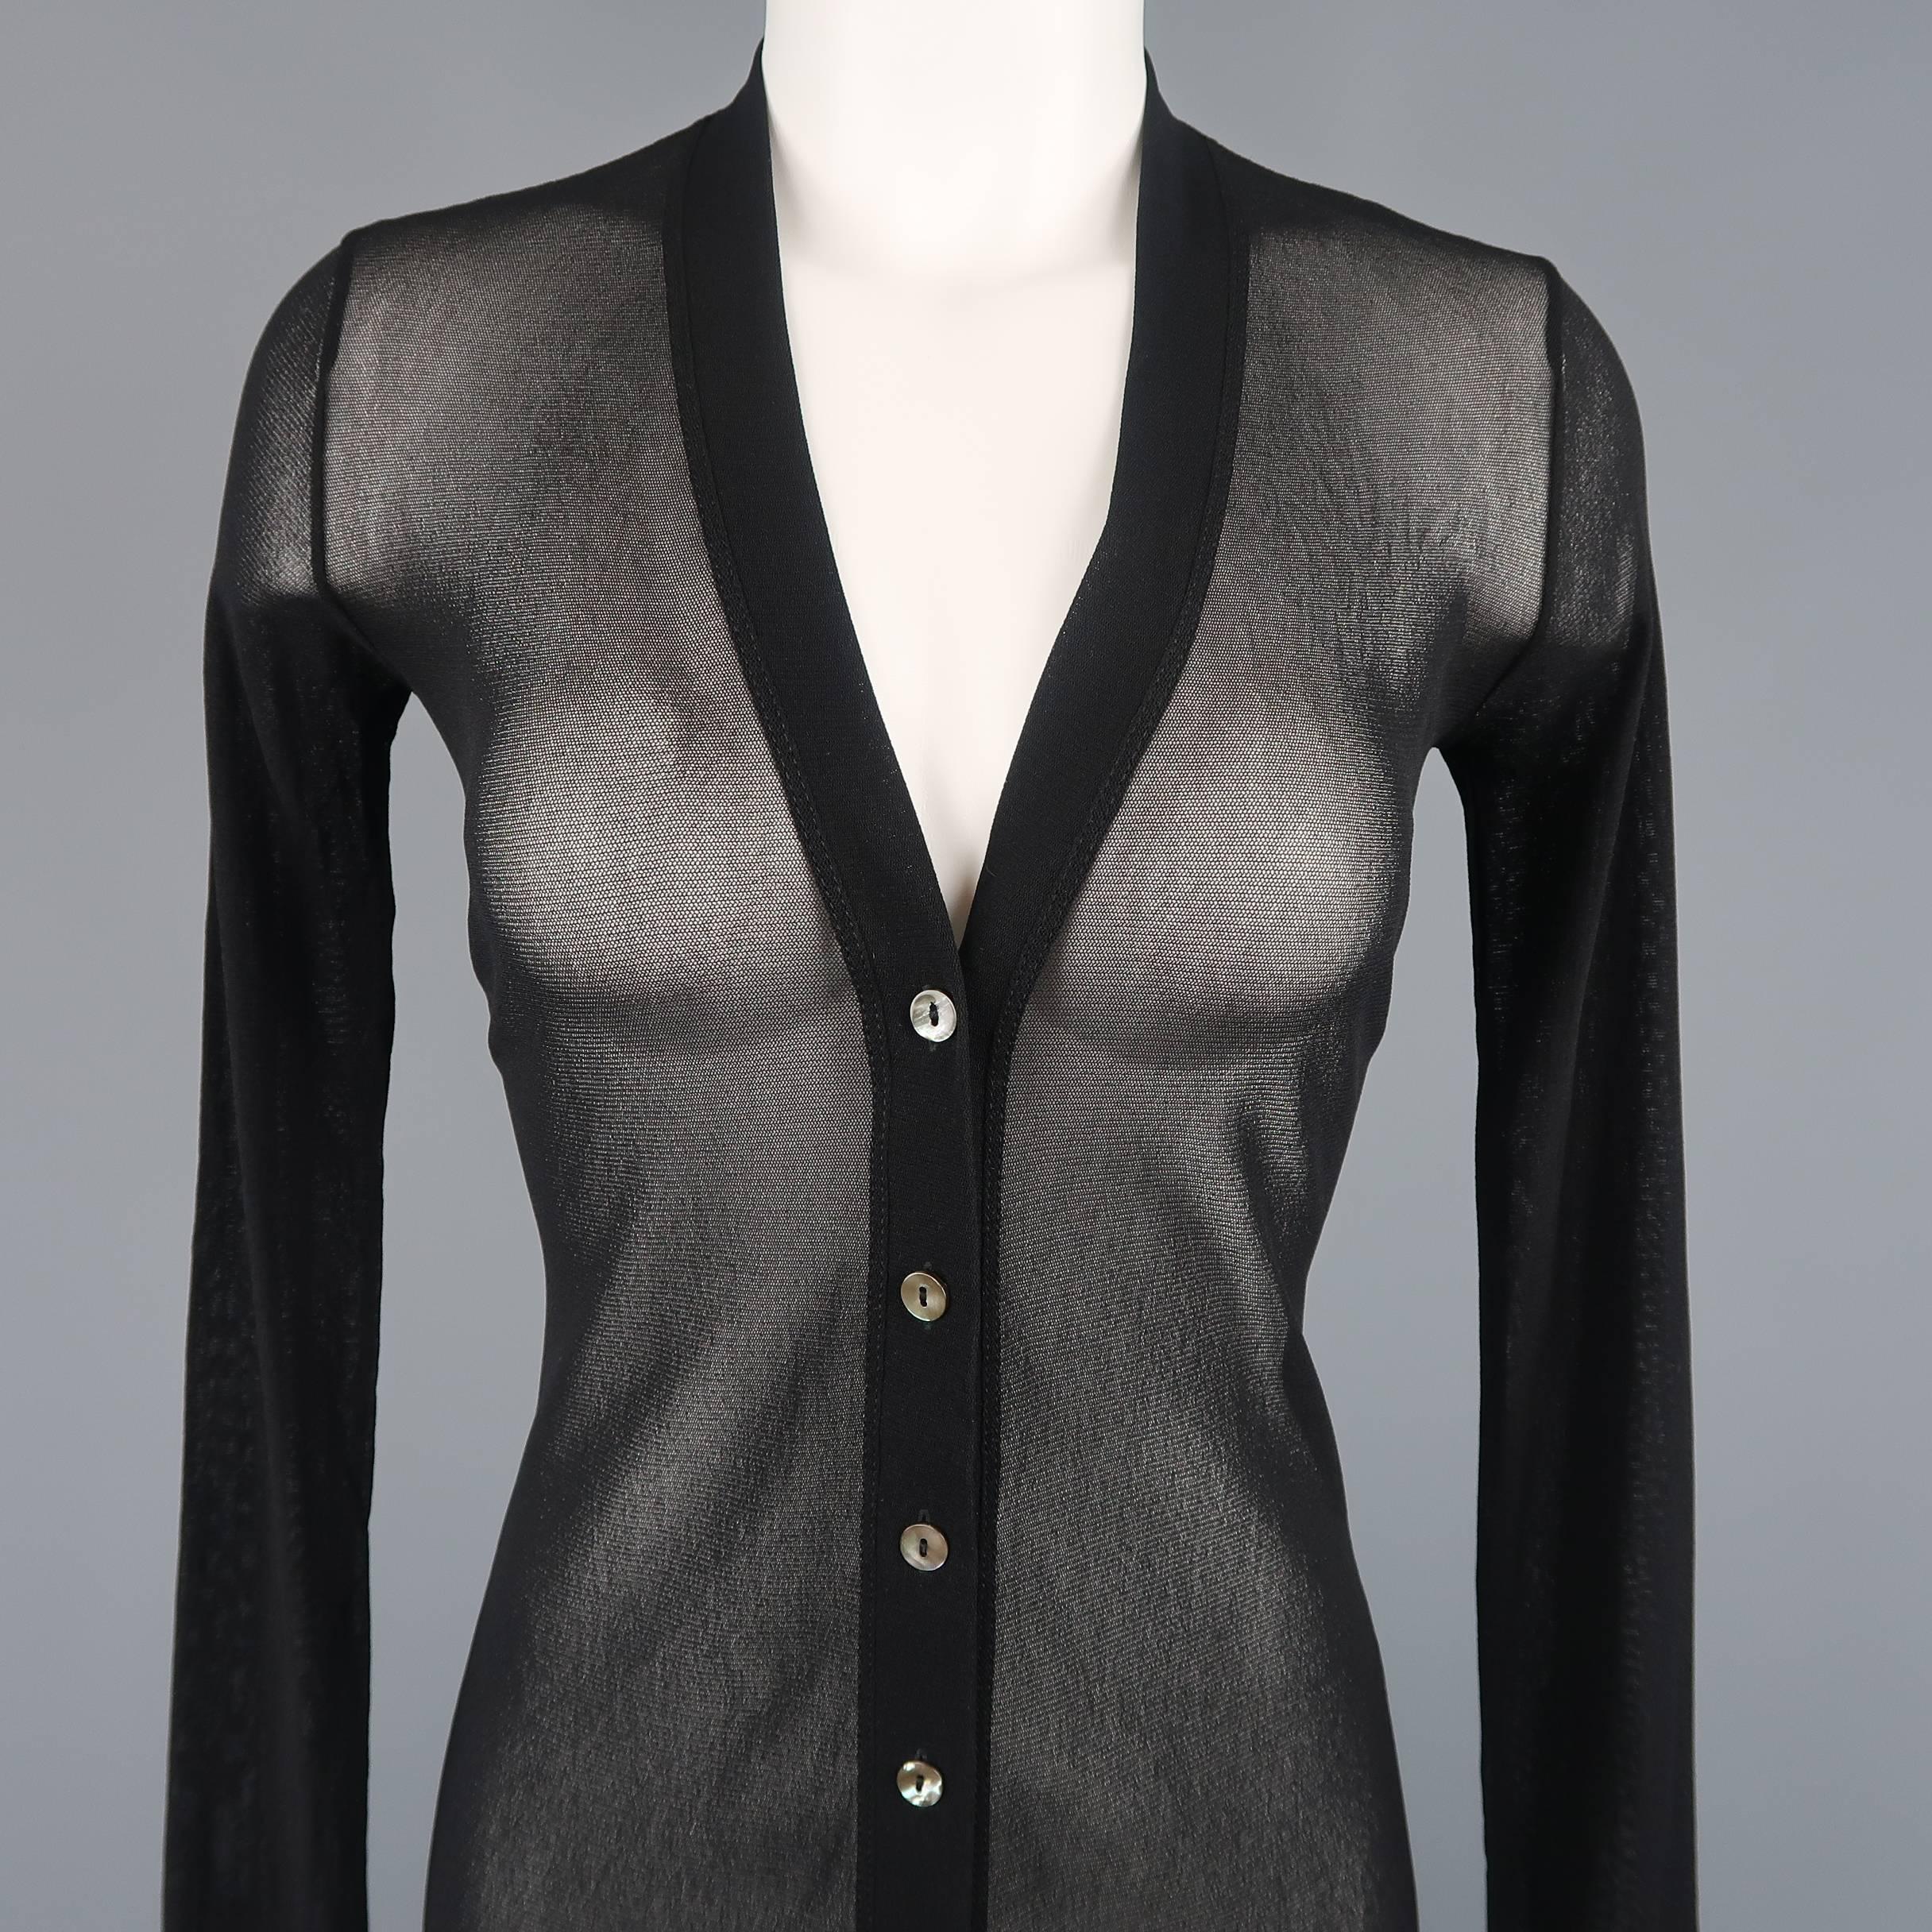 Jean Paul Gaultier Vintage long cardigan dress comes in black micro mesh with a deep V neck button up front. Made in Italy.
 
Excellent Pre-Owned Condition.
Marked: M
 
Measurements:
 
Shoulder:14.5 in.
Bust: 34 in.
Waist: 24 in.
Hip: 34 in.
Sleeve: